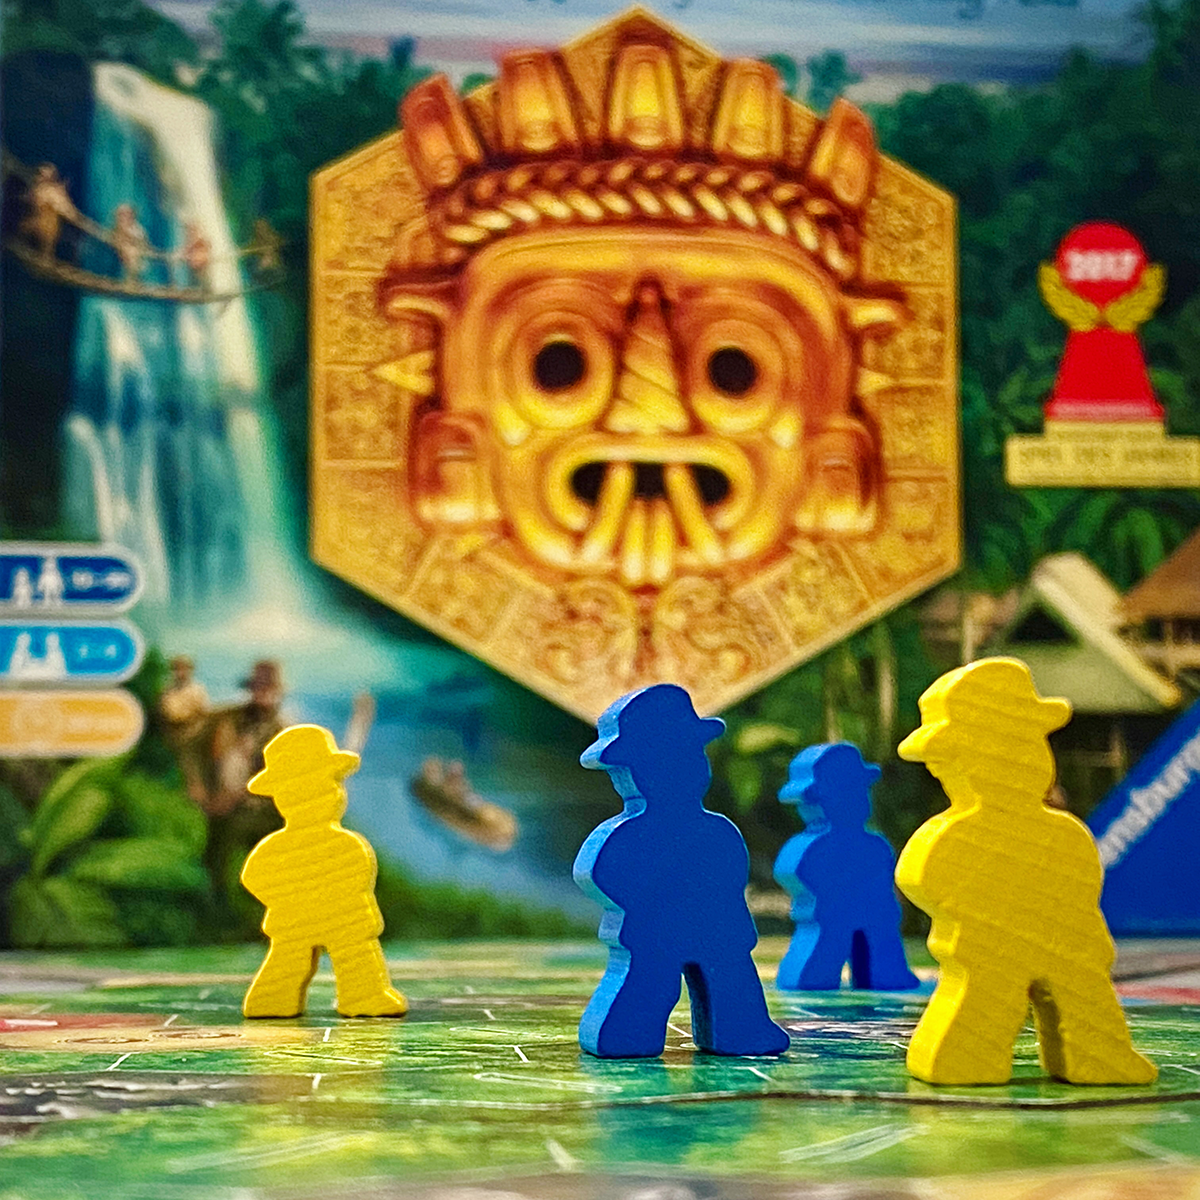 Buy The Quest for El Dorado from Out of Town Games